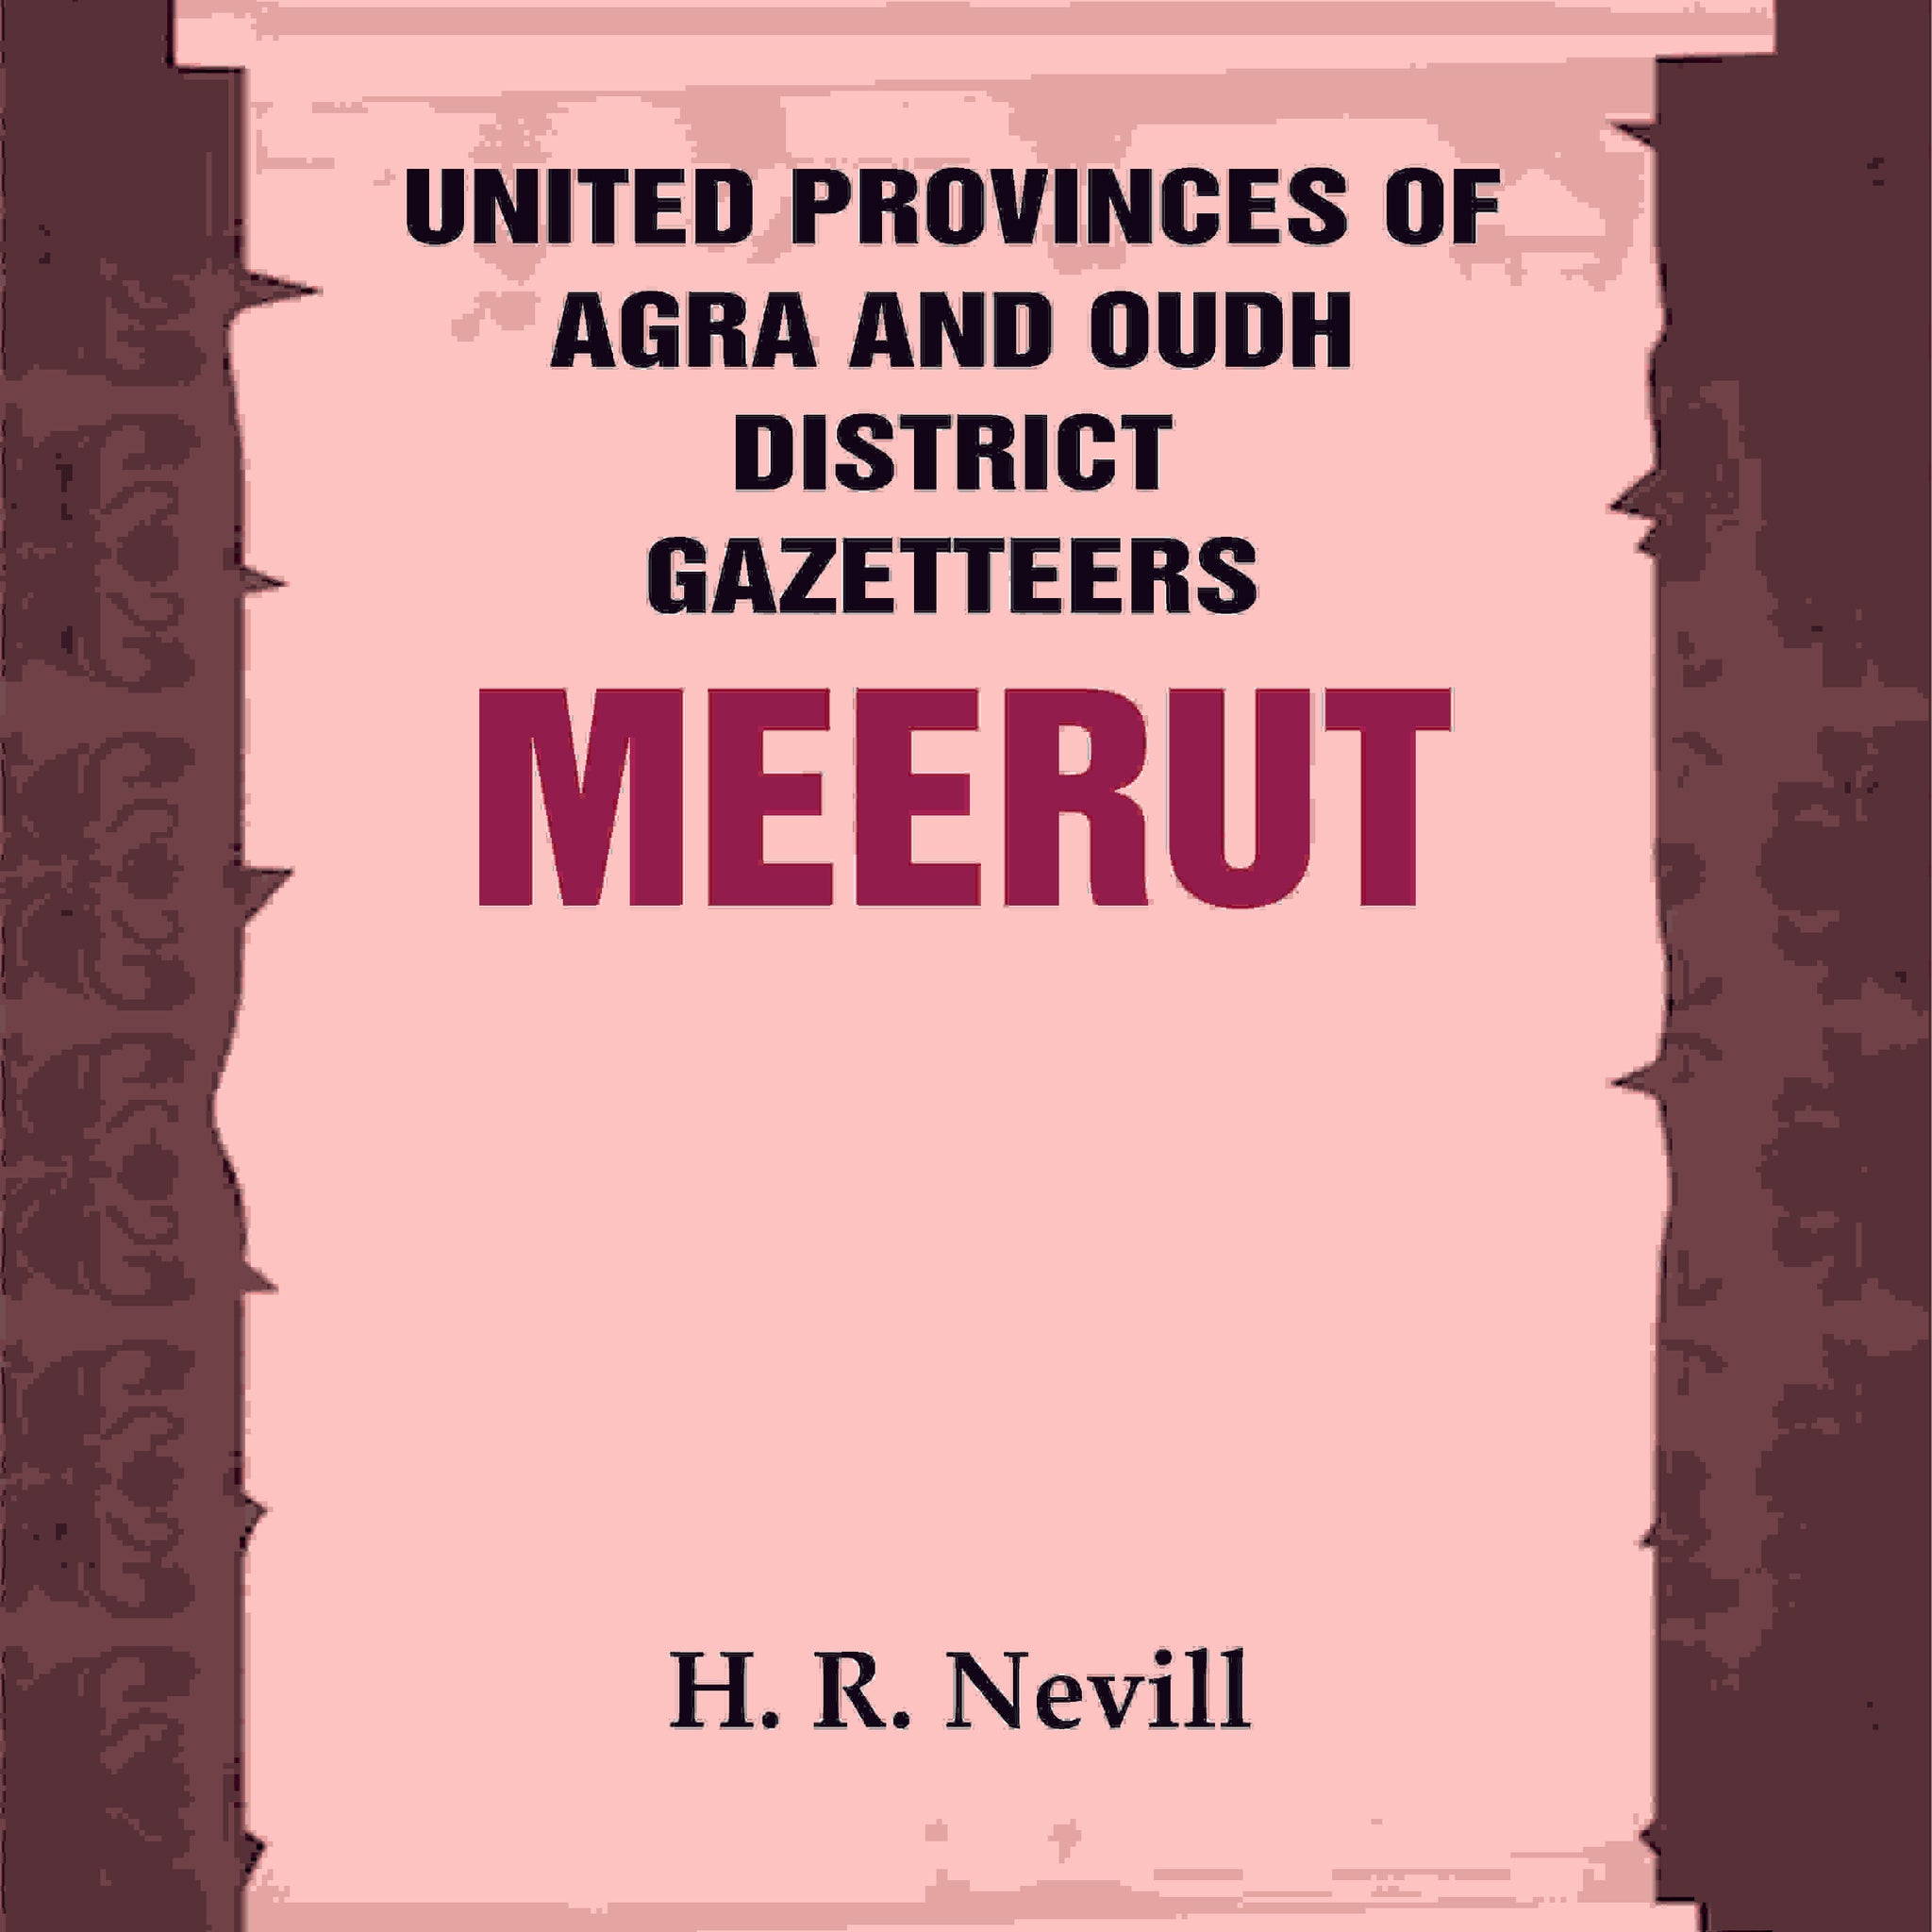 United Provinces of Agra and Oudh District Gazetteers: Meerut